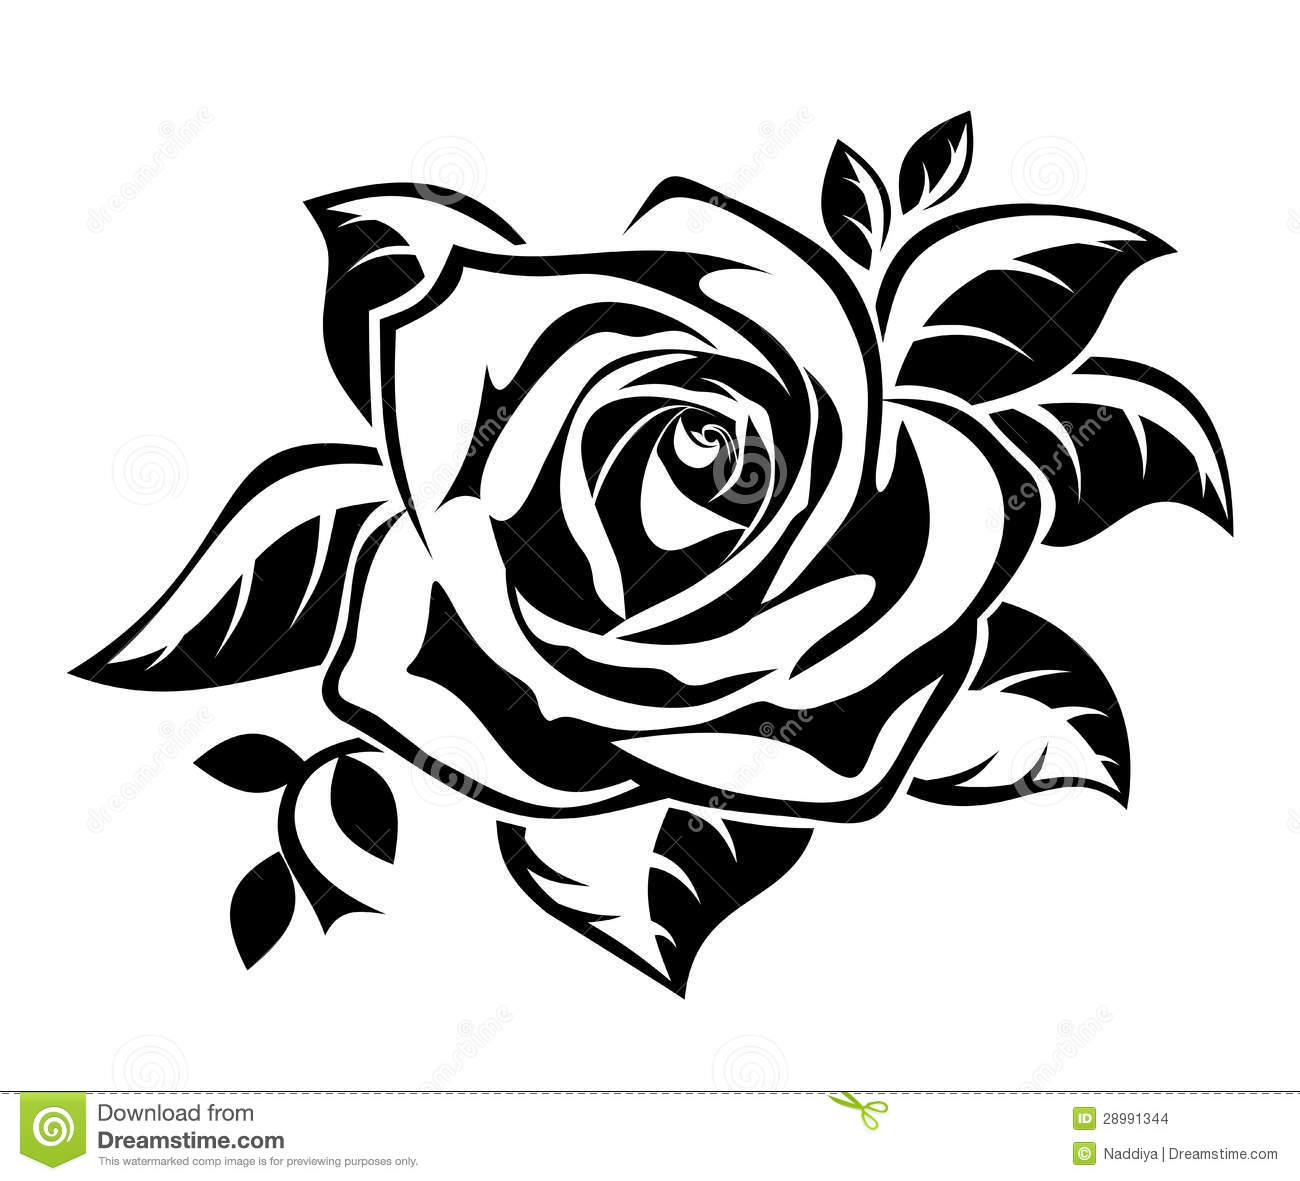 Roses Clip Art Black And Whit - Roses Clipart Black And White